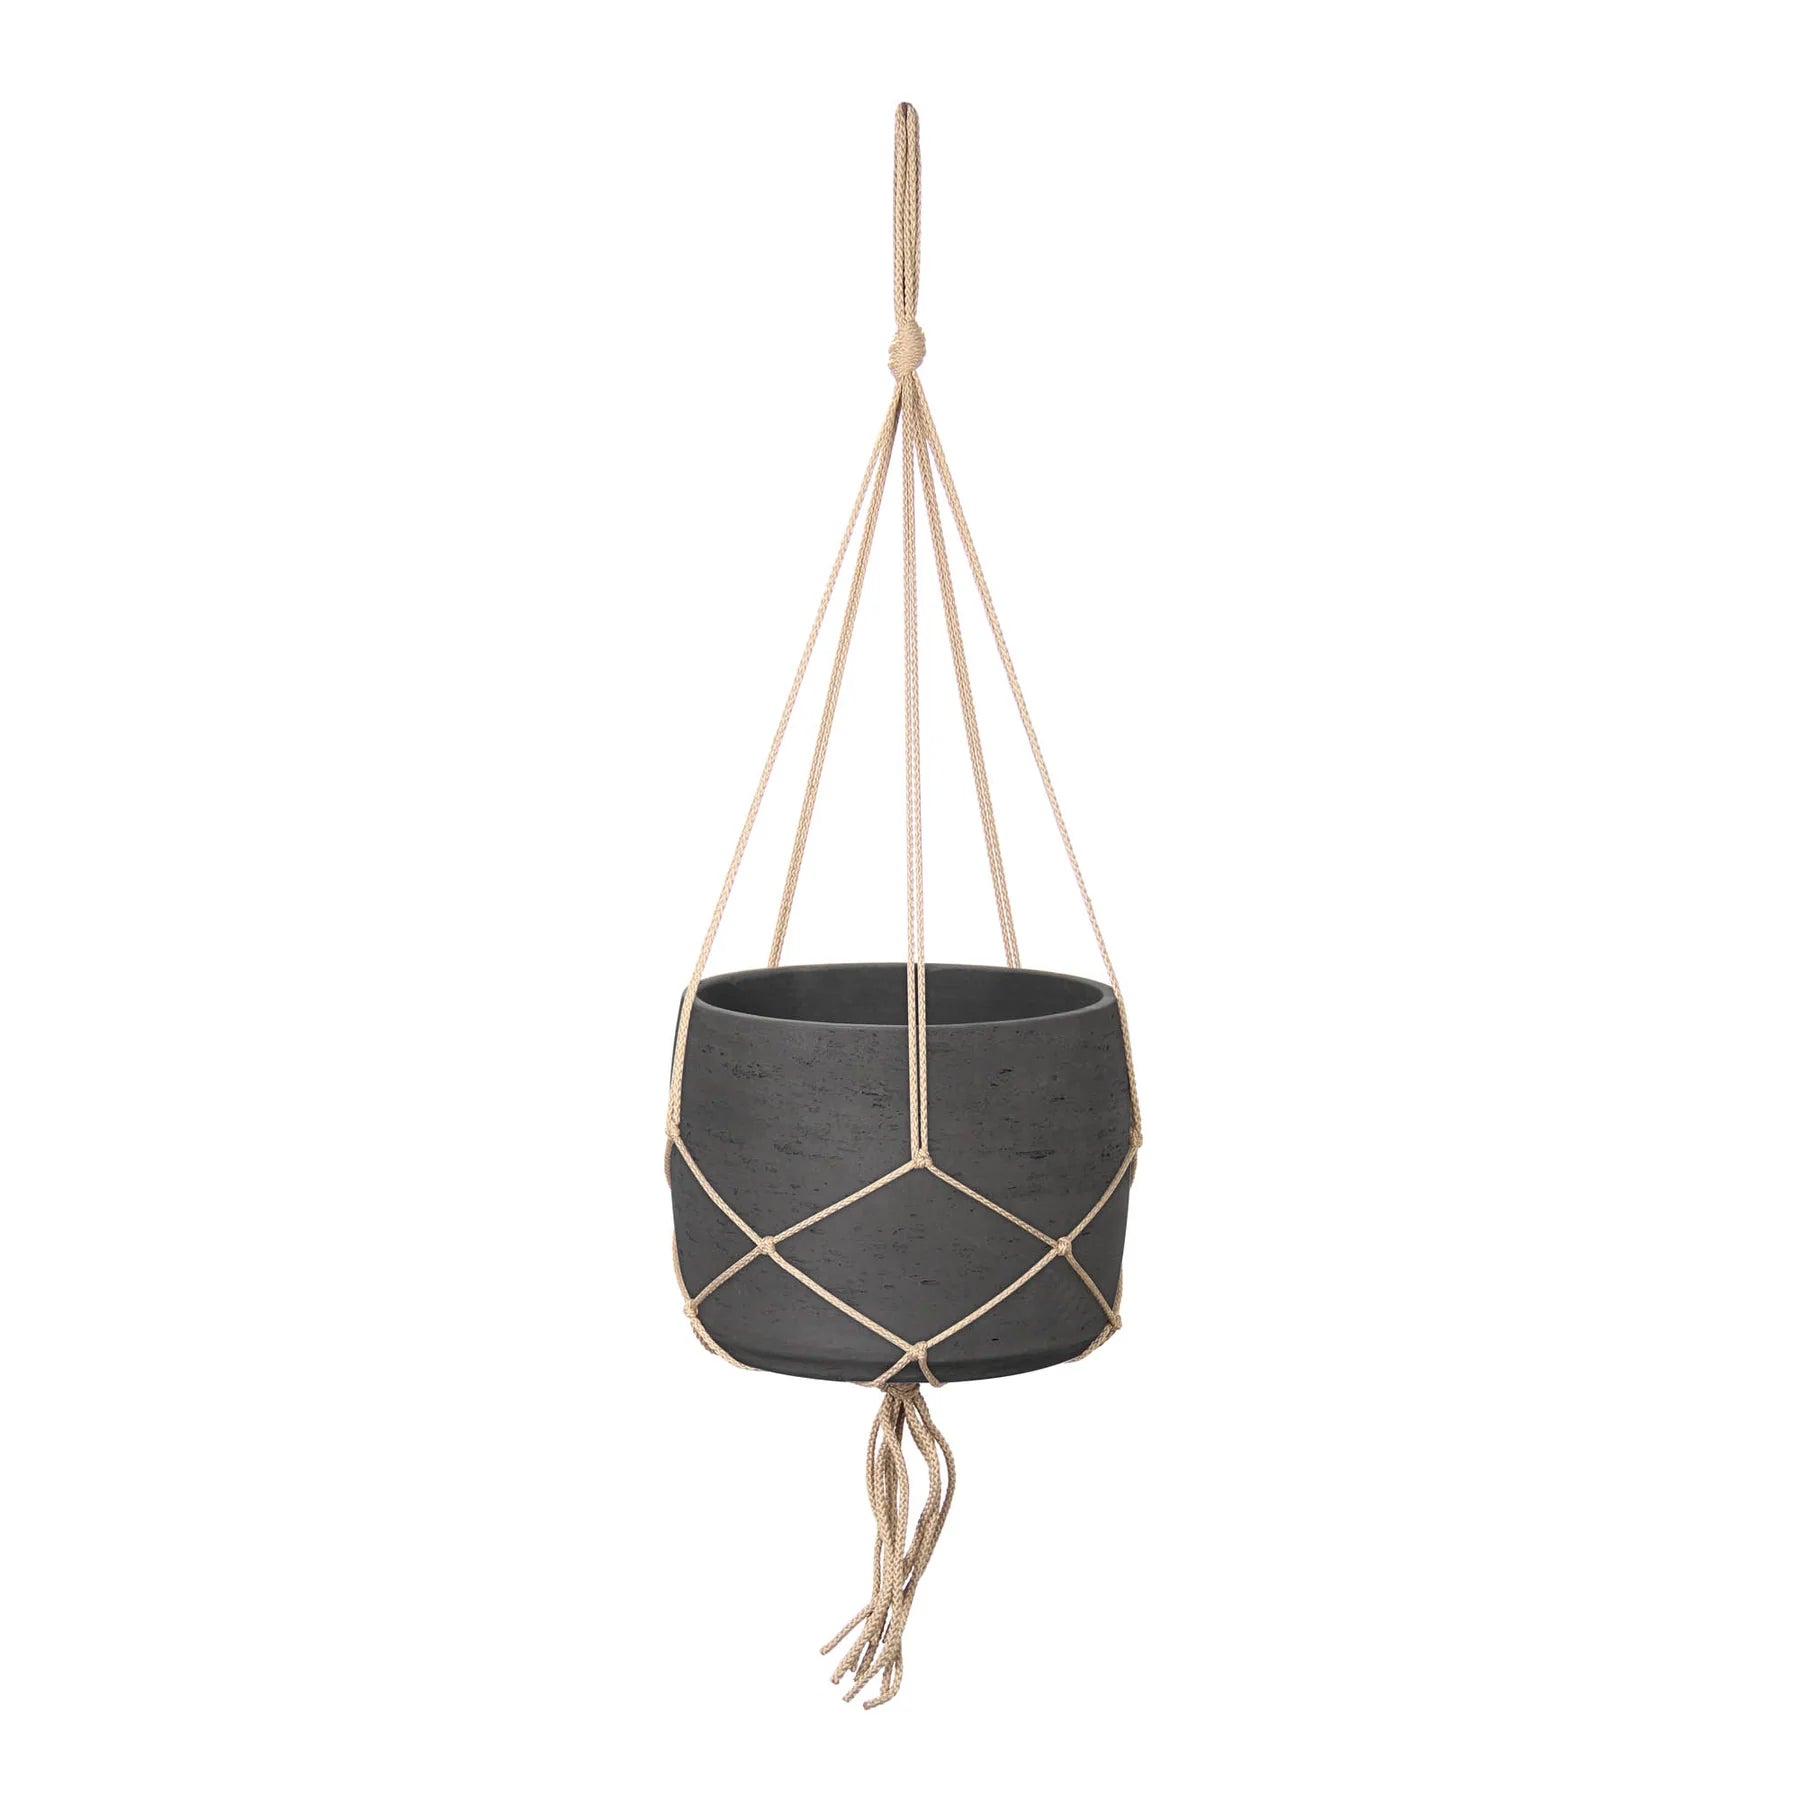 Picture of Craft Hanging Pot With Netting - Charcoal Grey